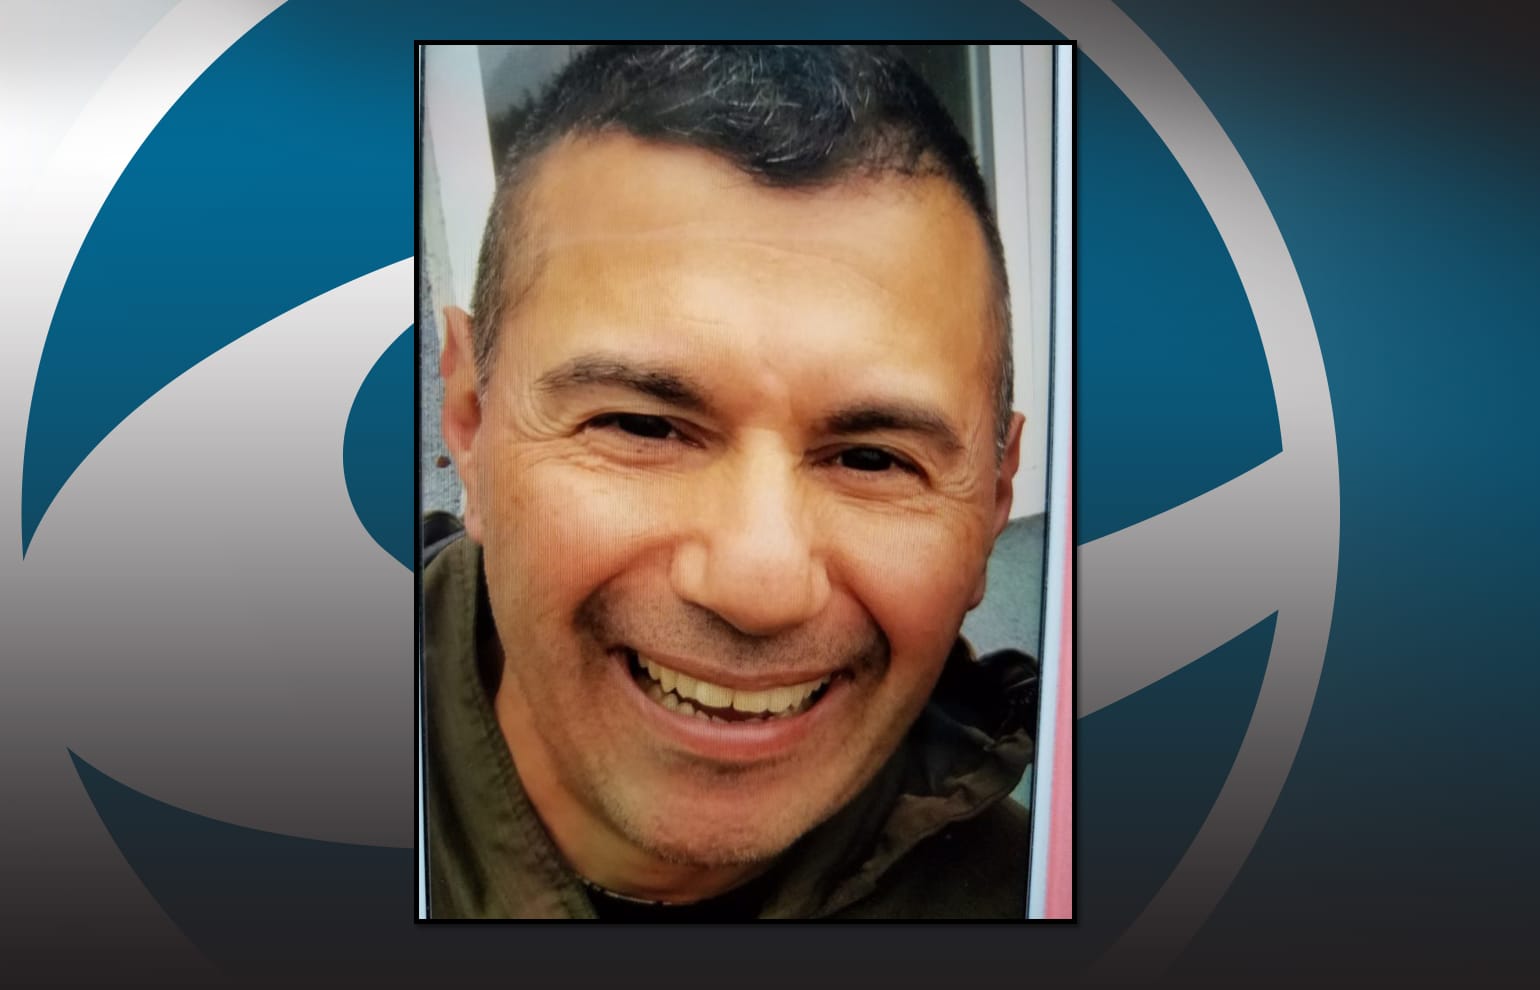 Enrique "Henry" Ramirez was found dead about a mile from the paved potion of Fredrickson Road near Woodland. The Cowlitz County Sheriff's Office is investigating.